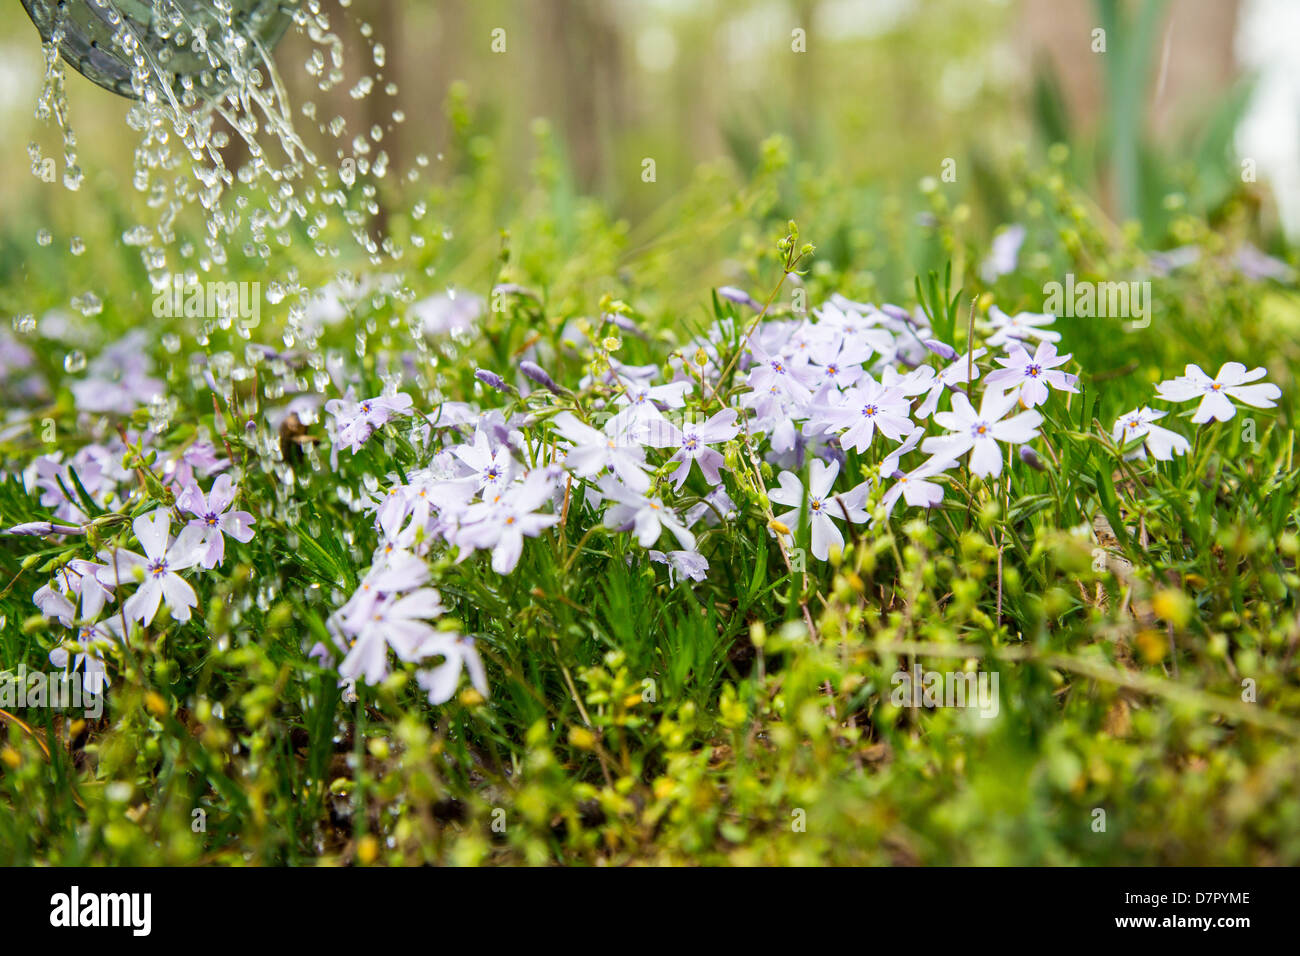 A watering can as it waters a patch of Phlox. Stock Photo